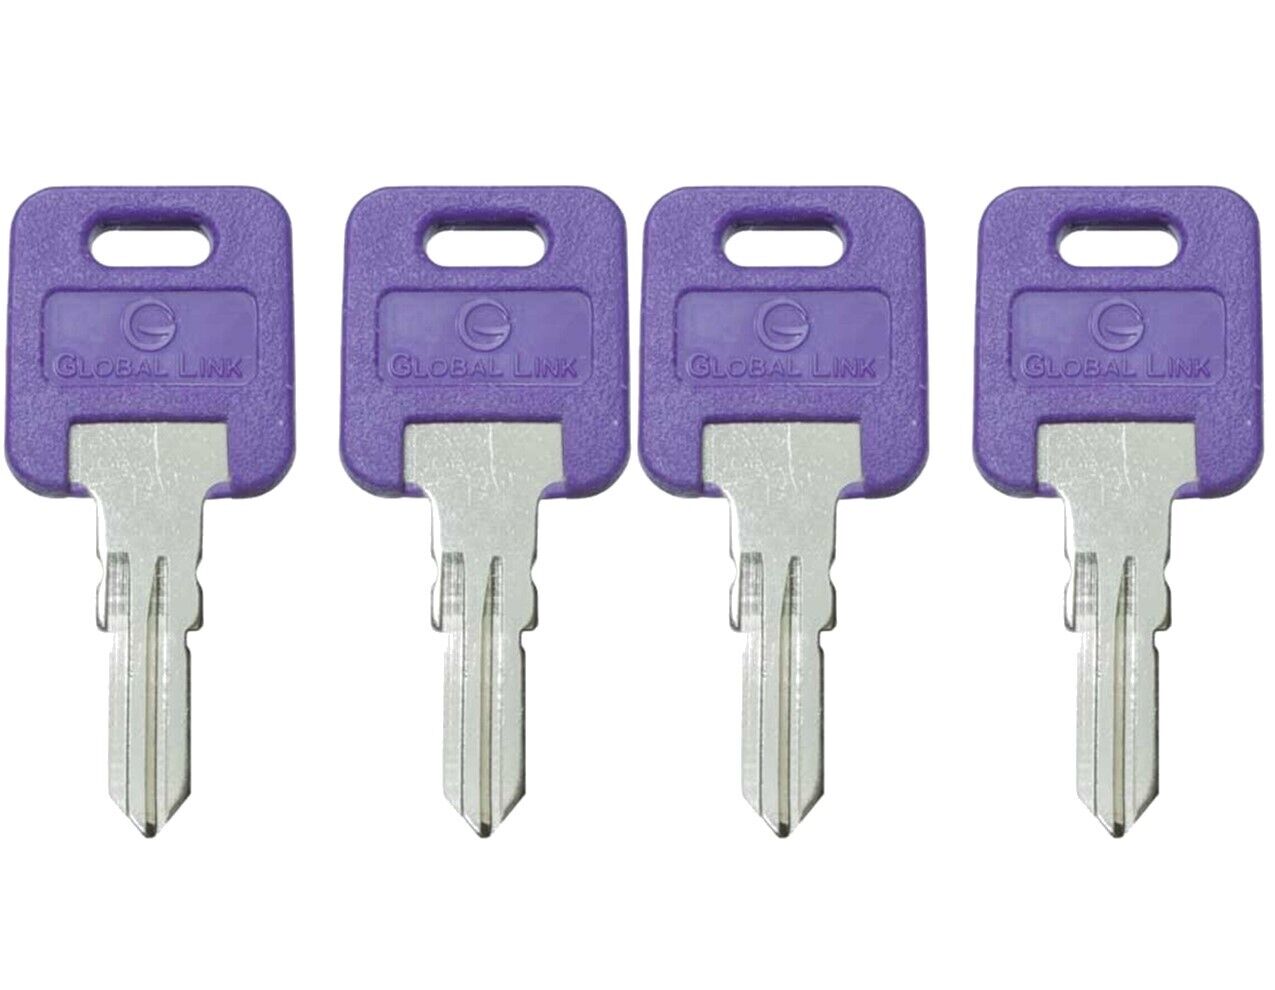 4 PK Global Link PURPLE Replacement RV Lock Key SELECT YOUR KEY CODE G301 - G391